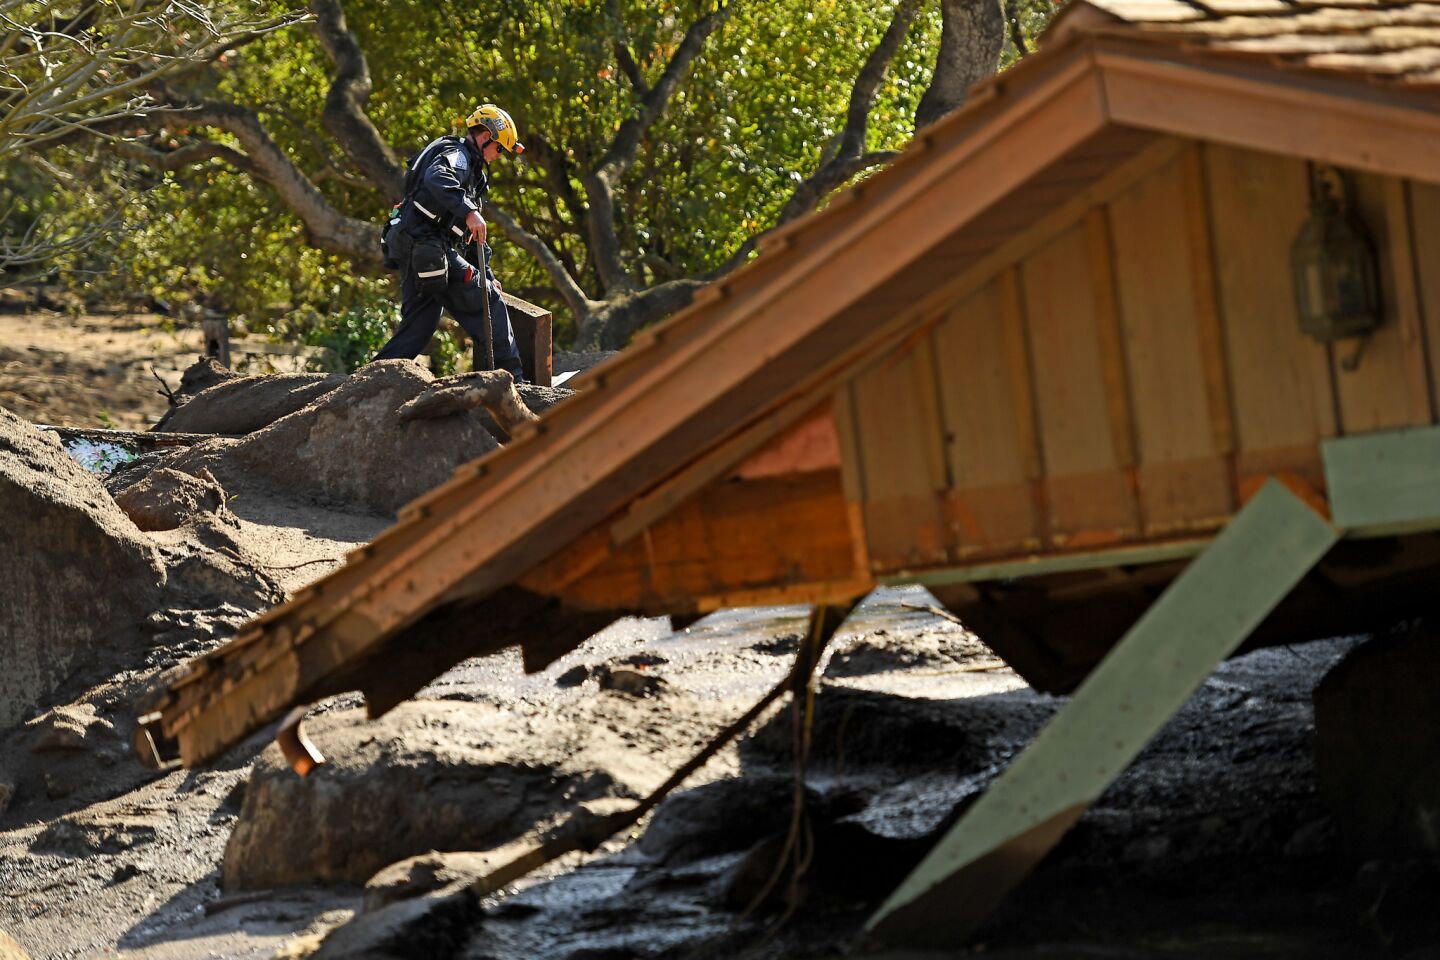 A member of the search and rescue team inpsects property near a home along Glen Oaks Drive in Montecito.